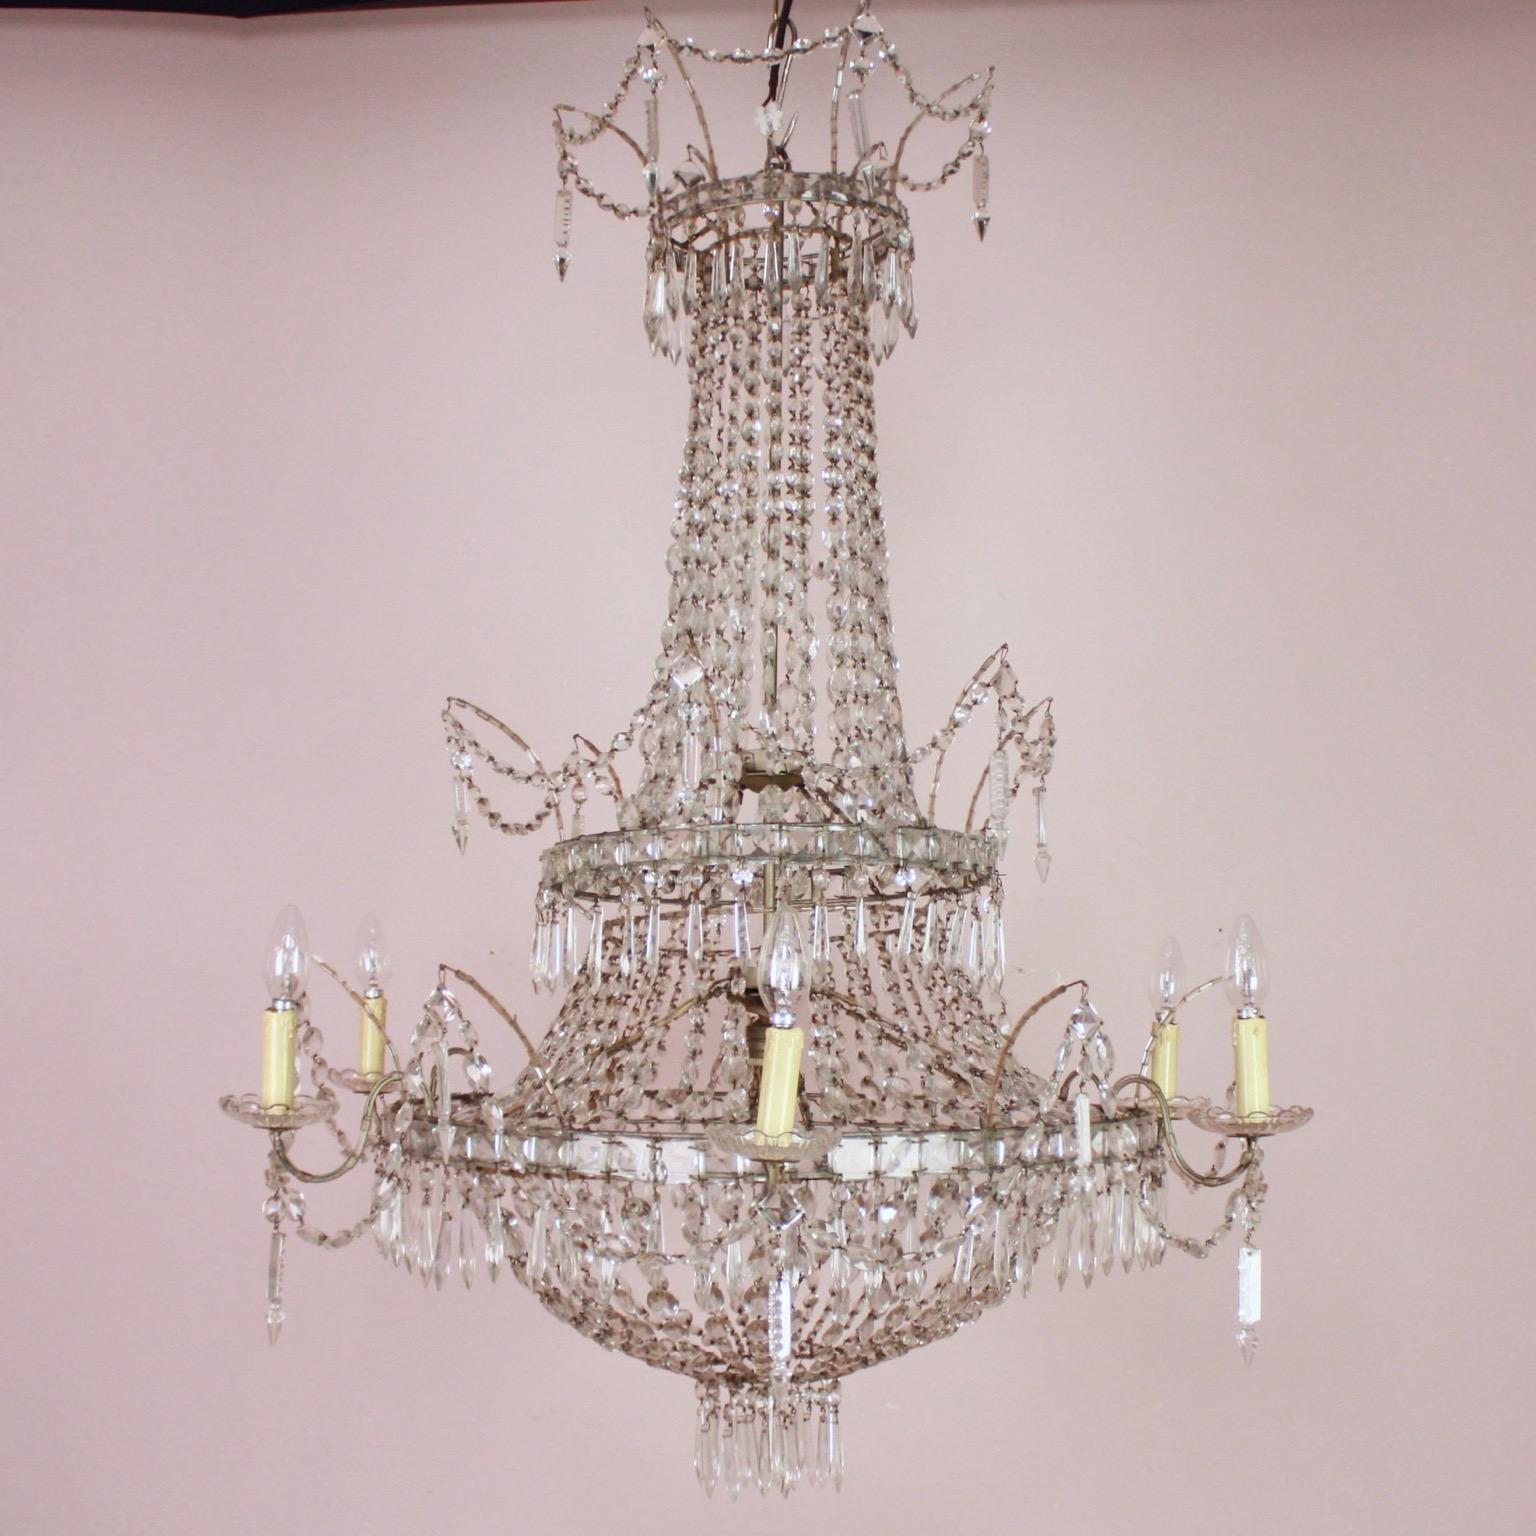 Large Pair of Spanish Empire Style 7-Light Crystal-Cut Chandeliers, in the Style of the Spanish Royal Factory of Glass and Crystal of La Granja

A large pair of Empire style 7-light crystal-cut chandeliers in the style of the Spanish Royal Factory